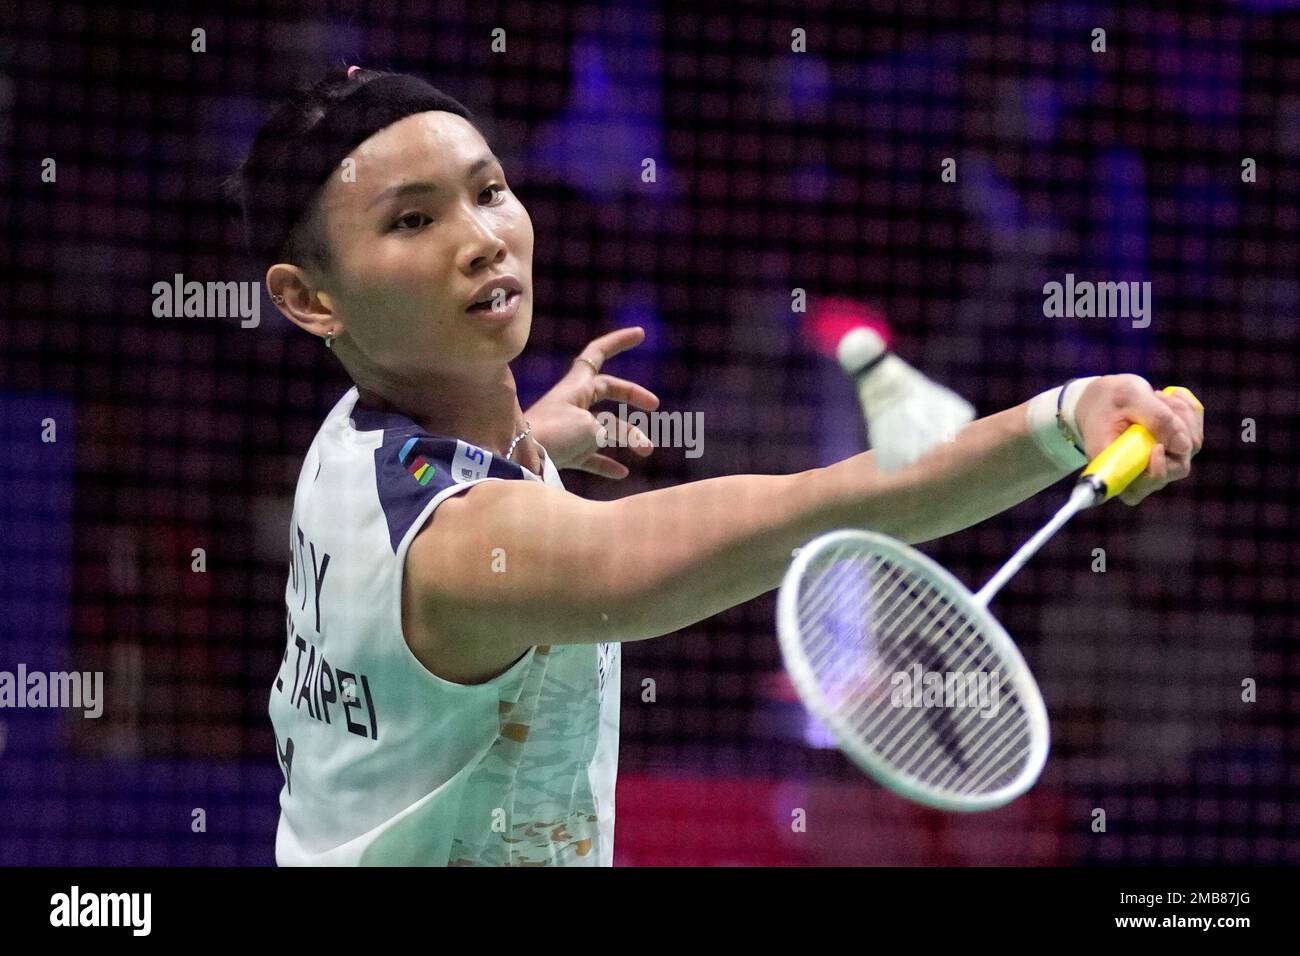 Taiwans Tai Tzu Ying competes against Chinas Chen Yu Fei during their womens singles semifinal match at Indonesia Open badminton tournament at Istora Gelora Bung Karno Stadium in Jakarta, Indonesia, Saturday, June